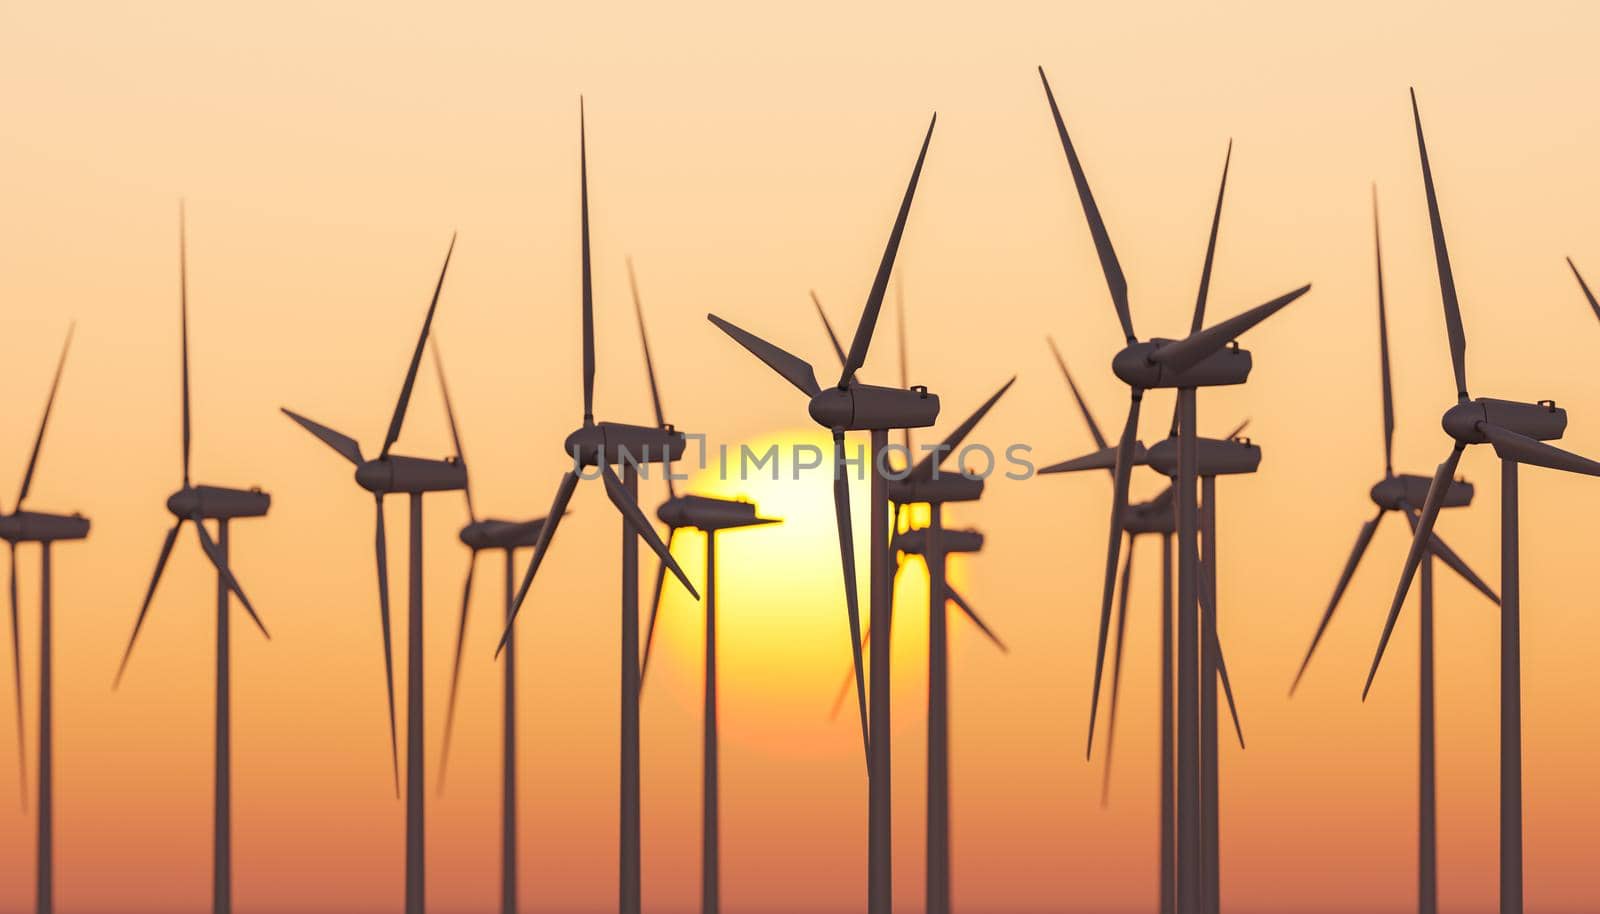 Windmills against sunset sky with sun by asolano